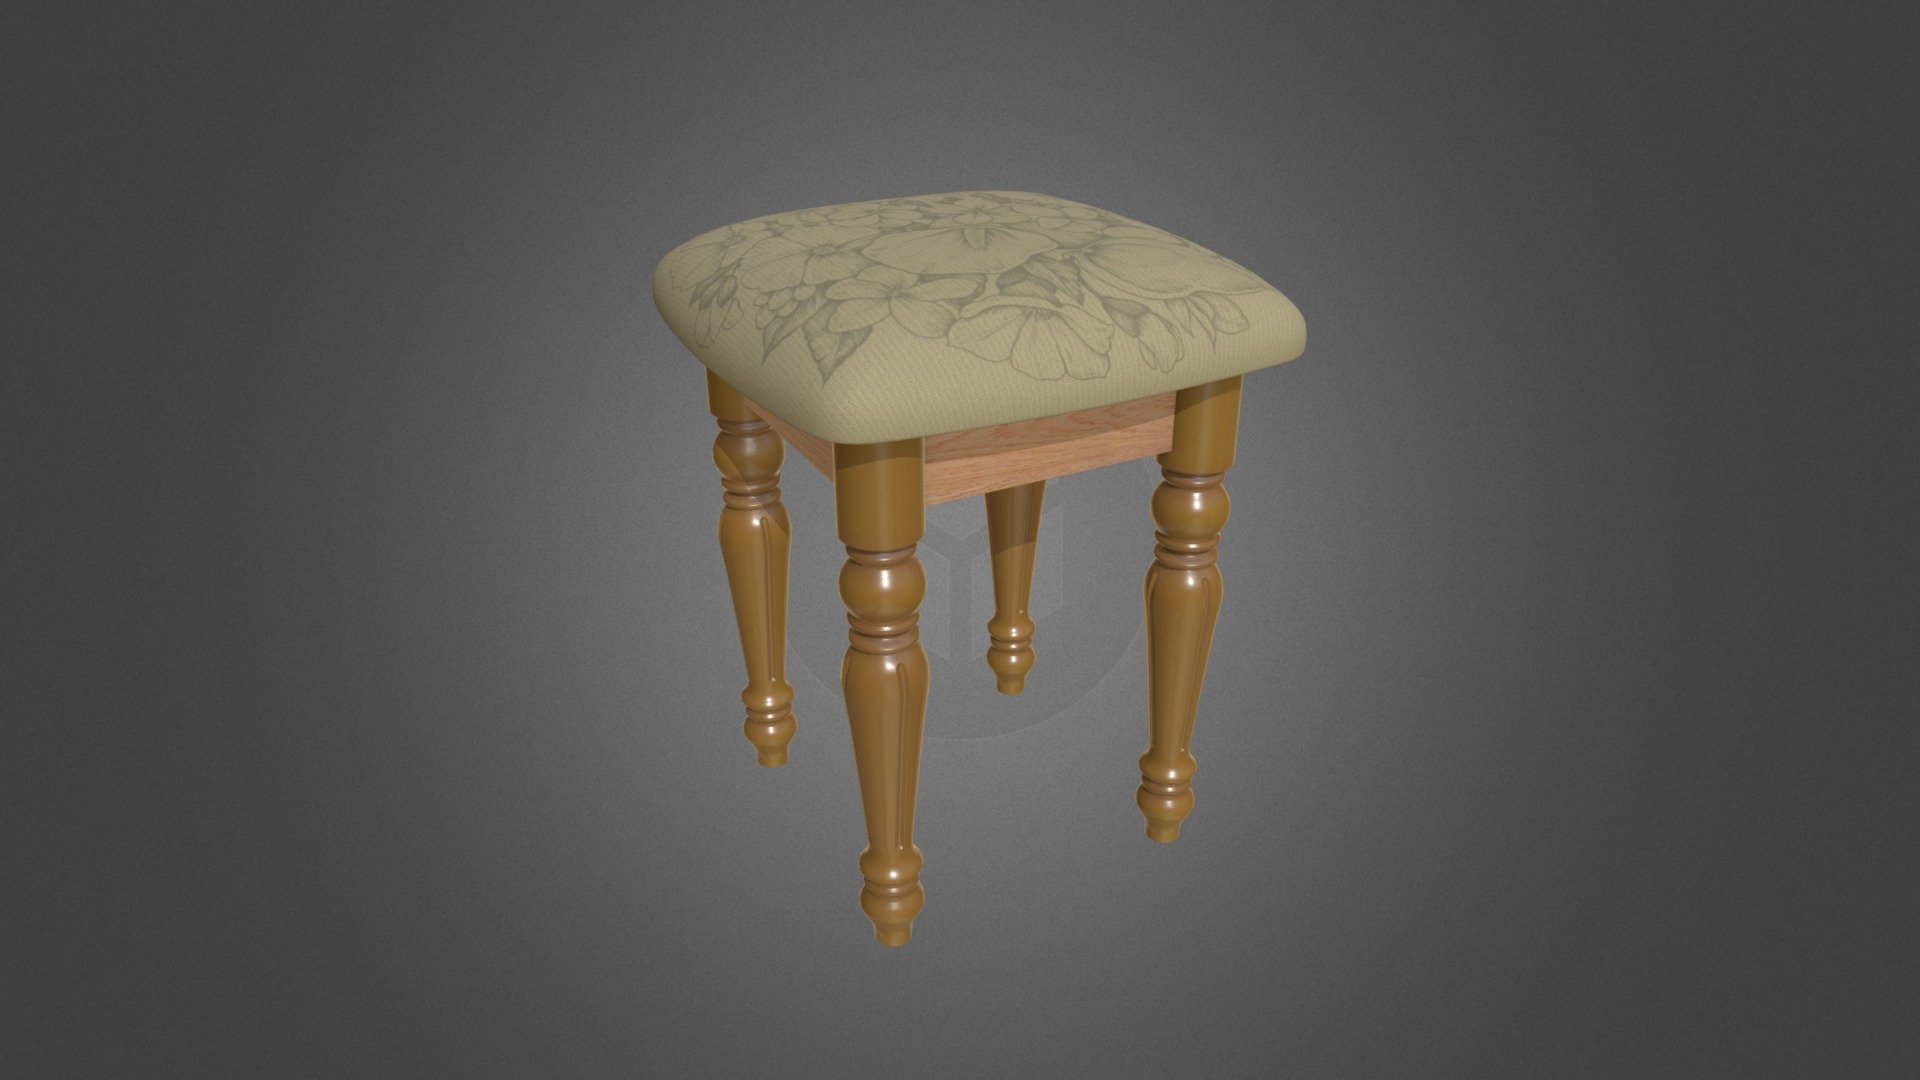 The material is an array of birch, a soft seat covered with a cloth with a two-color pattern depicting nature. Width 40 Depth 40 Height 50 cm. In the archive: 3DS Max 2013 V-Ray (V-Ray 3.00.08), textures 4096x4096, OBJ, Matlib (V-Ray), Cinima 4d V-Ray (R19, V-Ray 3.6.0).  Units: mm   Poly Count [0]
            Poly [13948]
                Vert [14070]
                Tri Face [0]
                Quad Face [13948]
                Ngon Face [0]
                Tri Mesh Face [0]
                Tri Mesh Vert  [0] - Stool Brown - 3D model by orbita-s 3d model